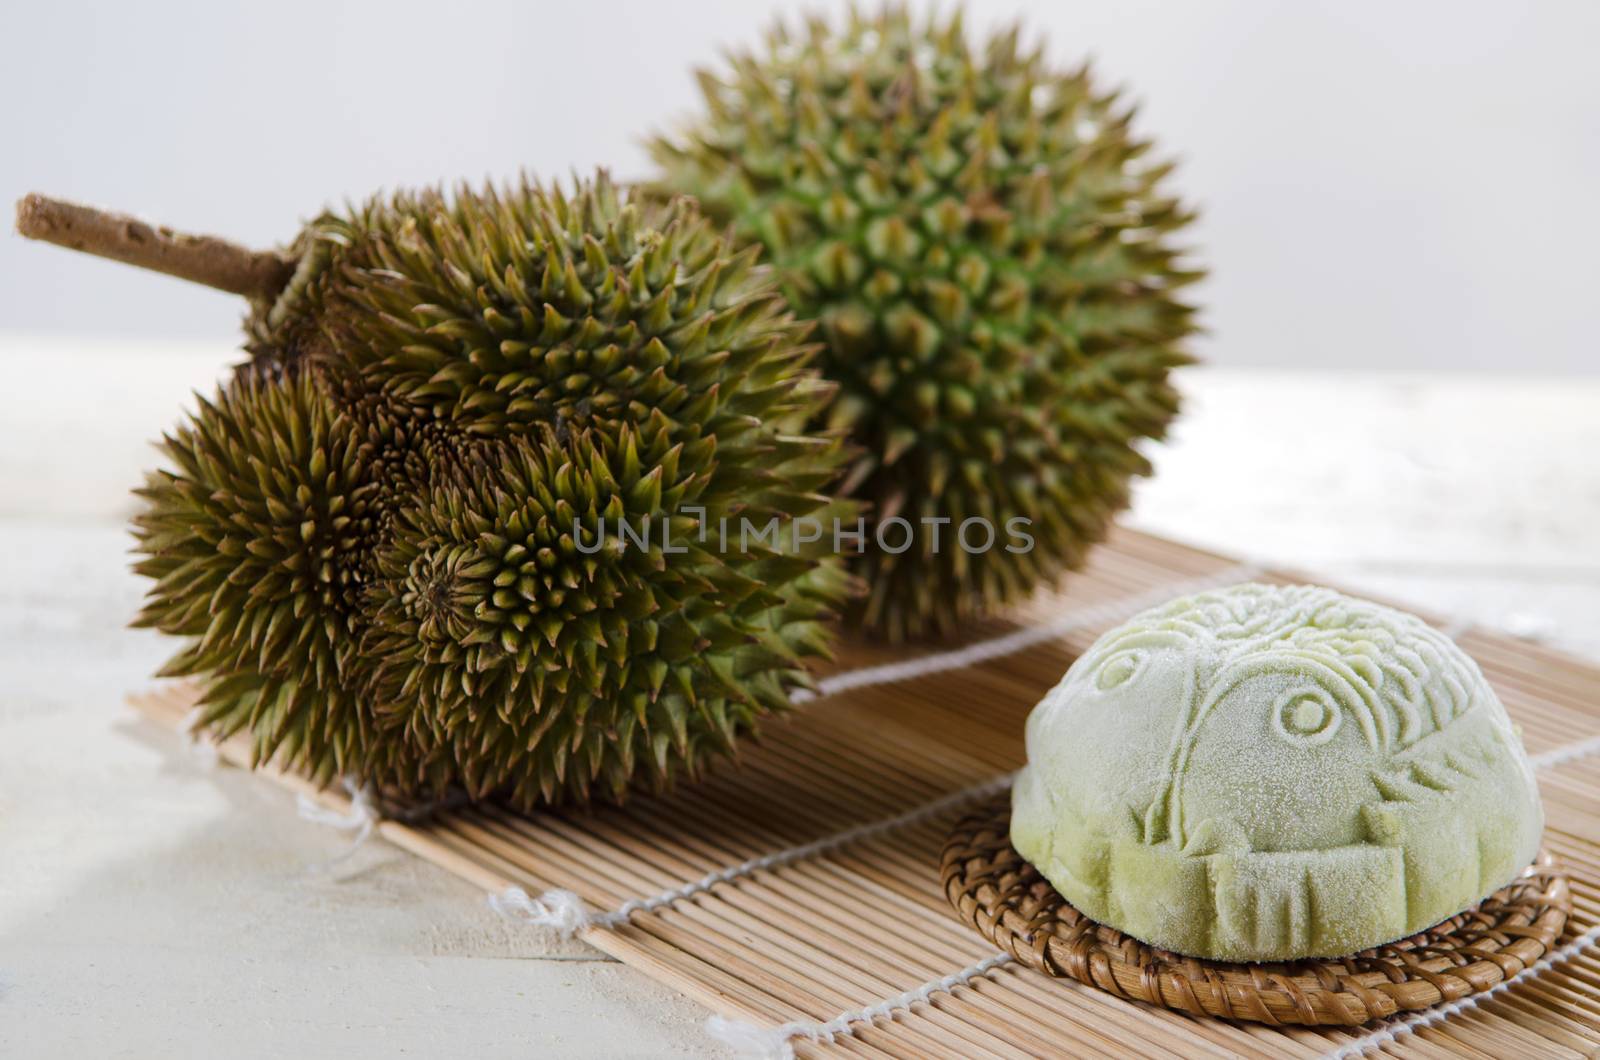  Durian Mooncake ,Chinese mid autumn festival food.